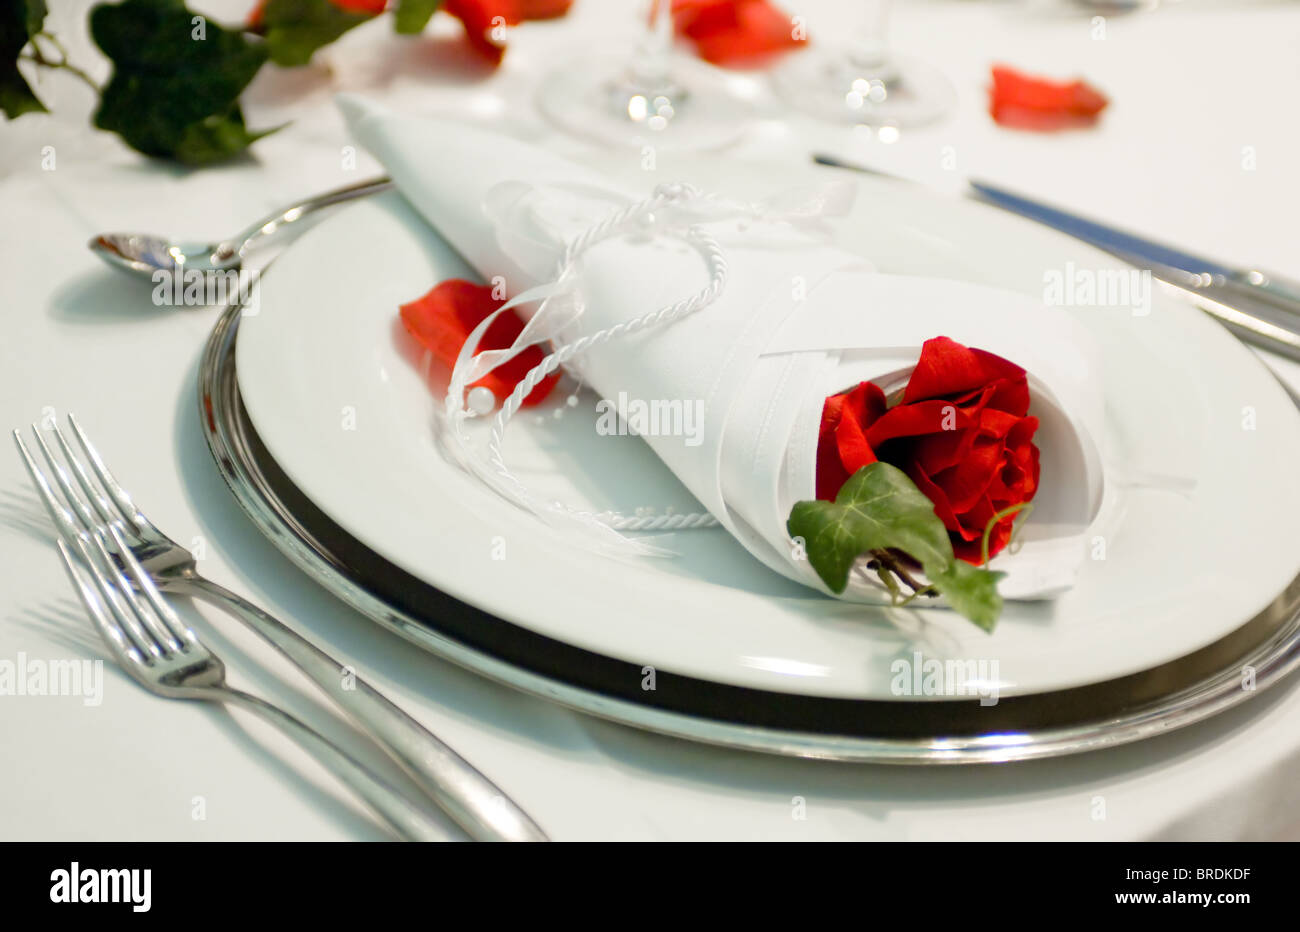 Covered banquet with festive decorations Stock Photo